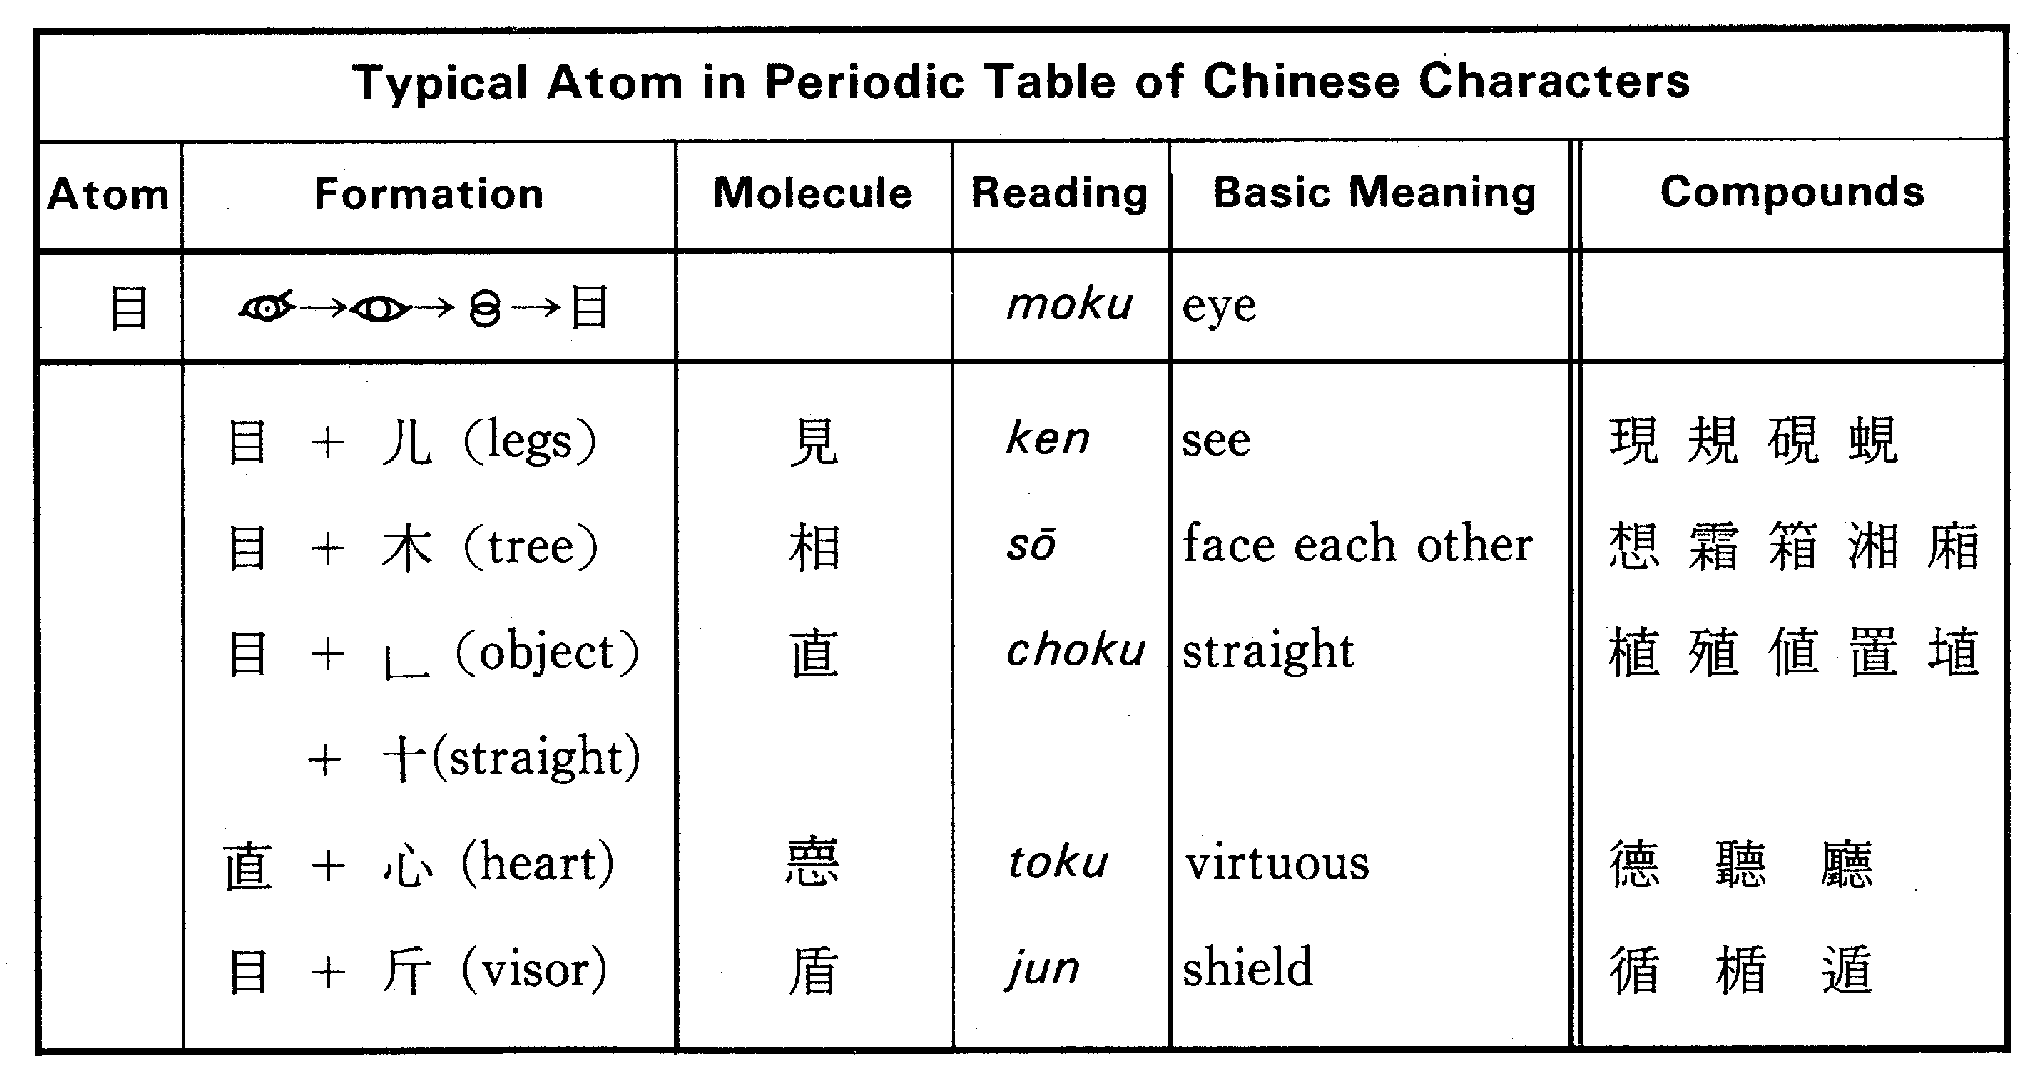 chinese-symbols-and-meanings-drawing-free-image-download